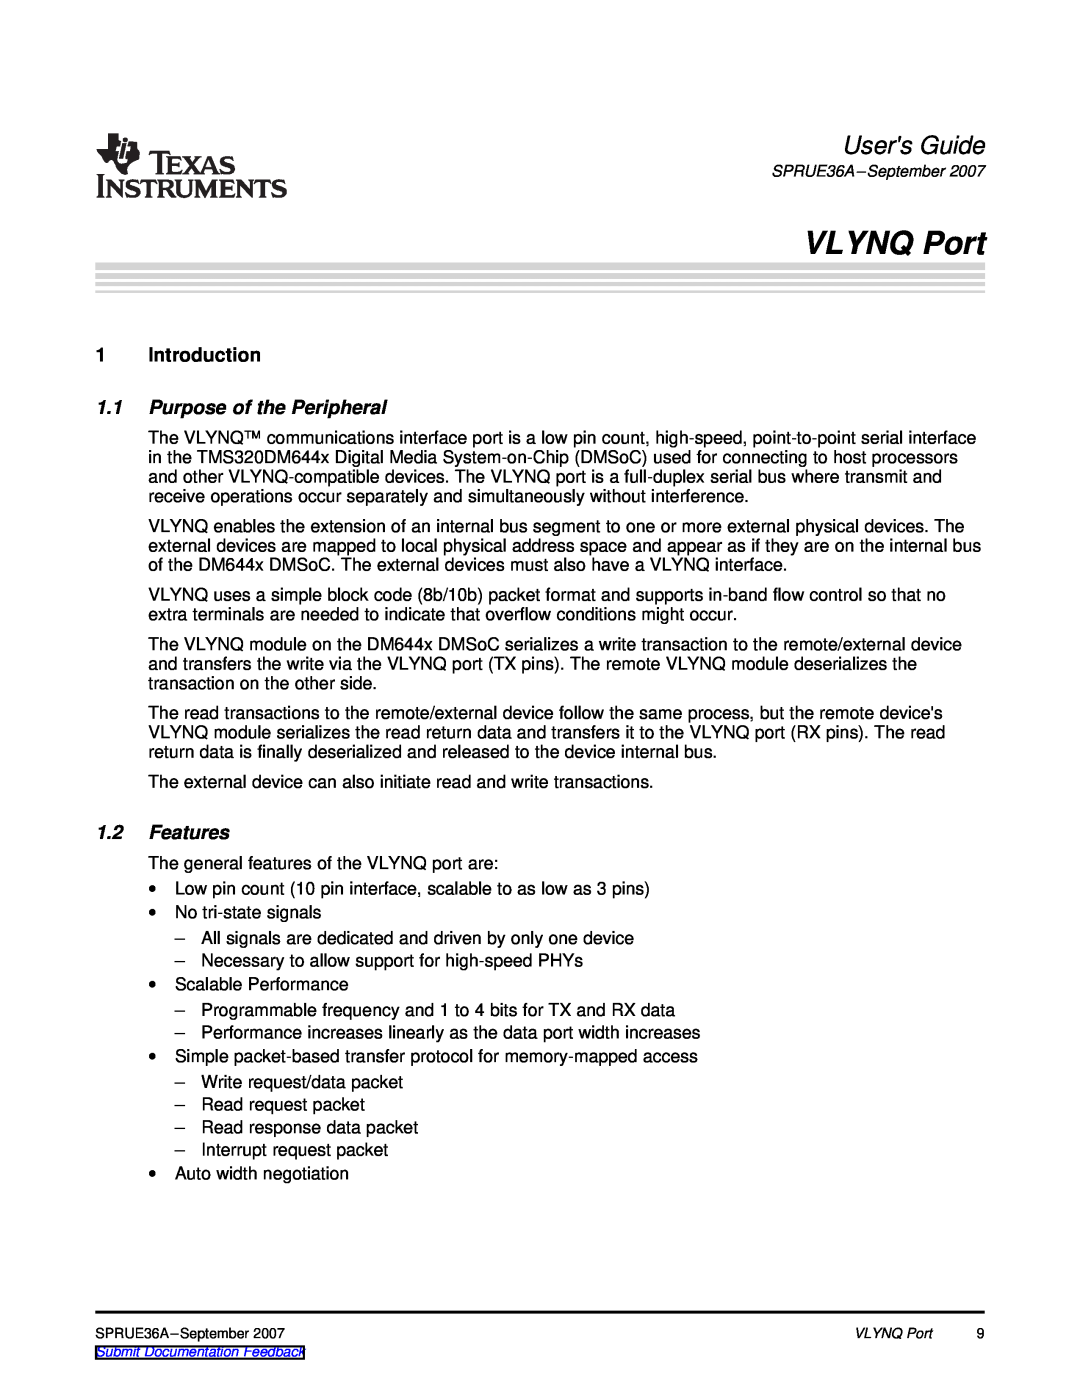 Texas Instruments VLYNQ Port manual Users Guide, Introduction, Purpose of the Peripheral, Features 